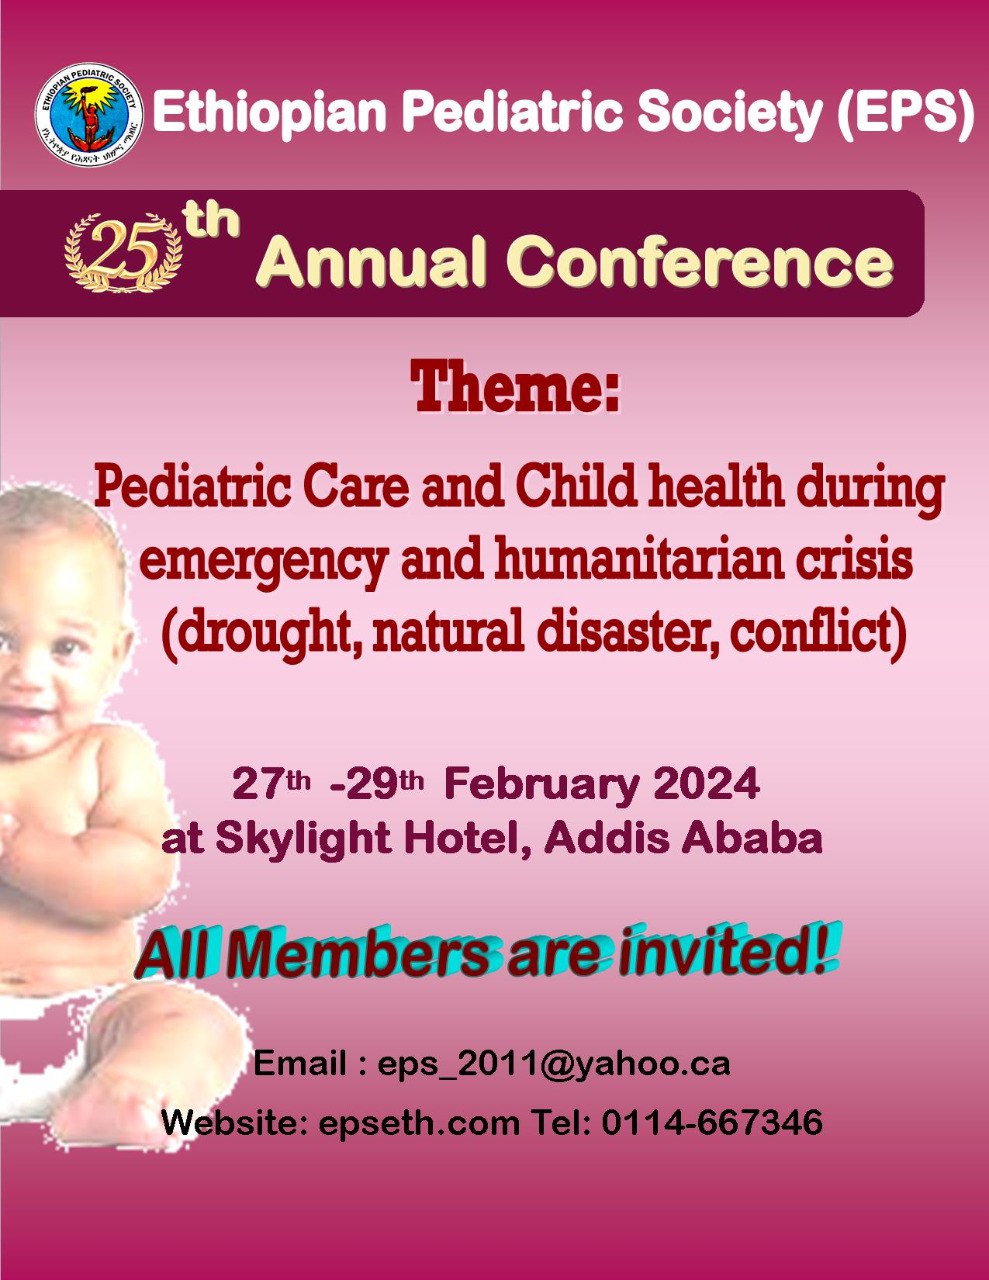 25th Annual Conference